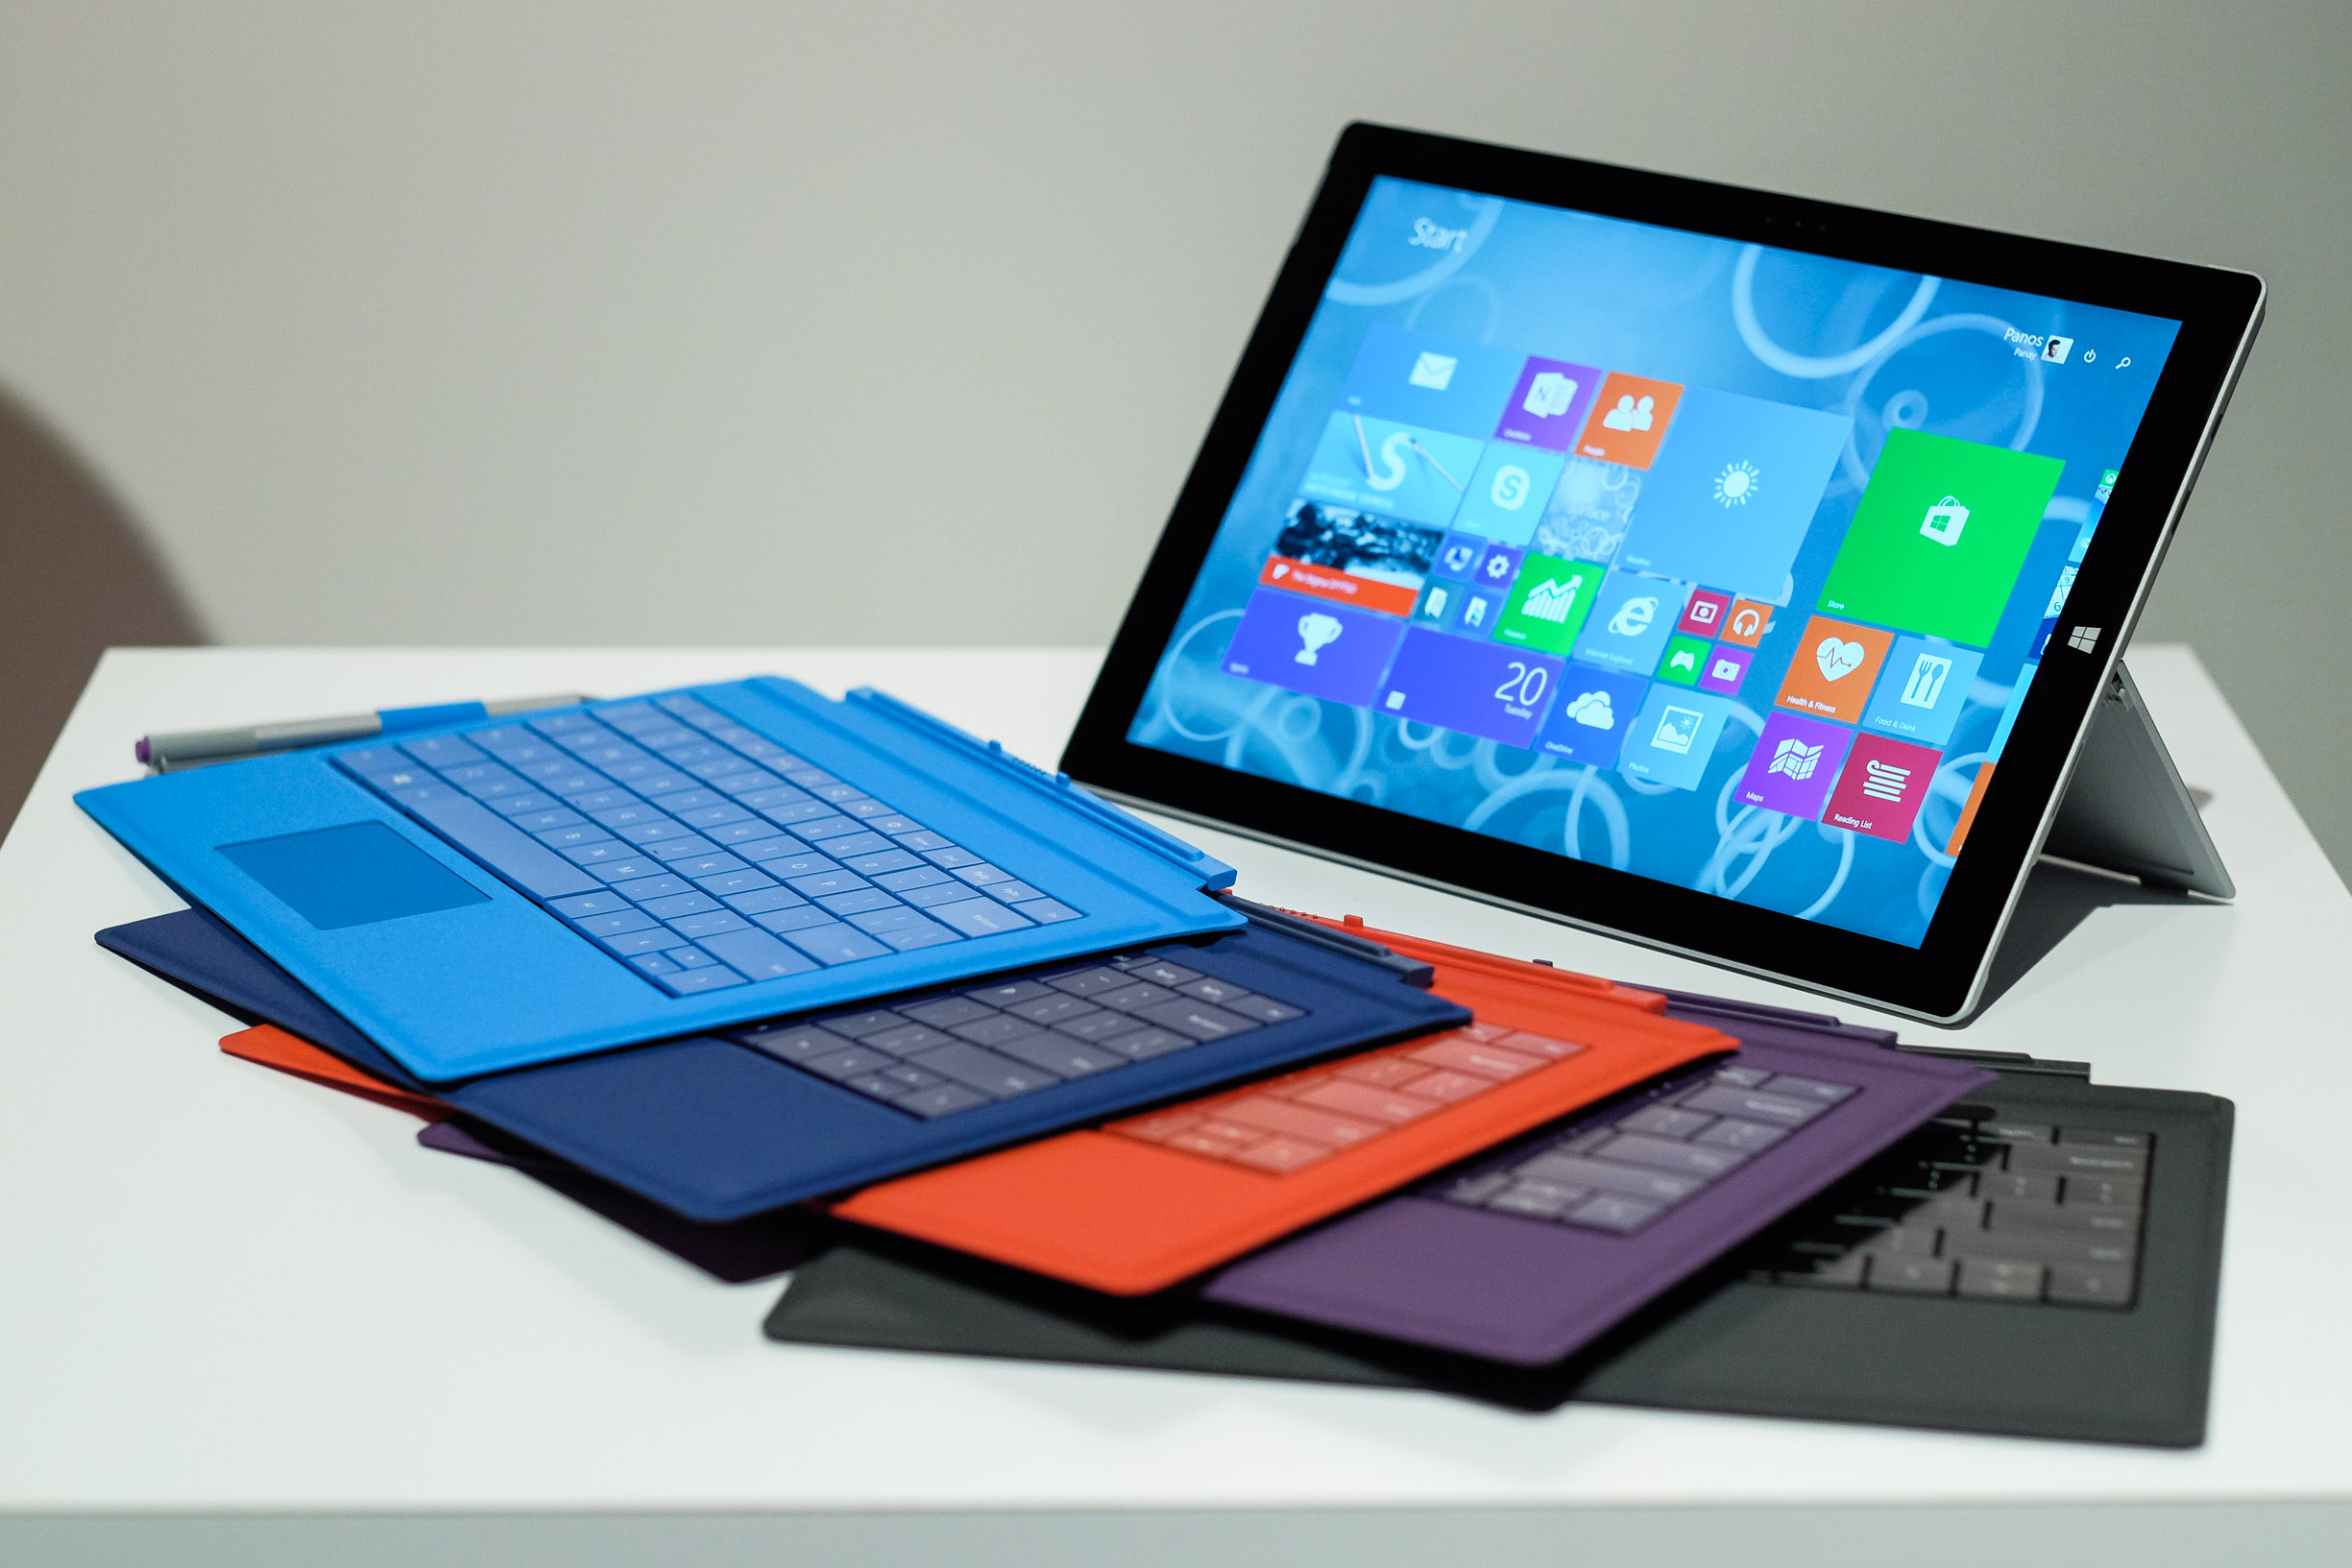 Microsoft Opens Pre-Orders for Surface Pro 3